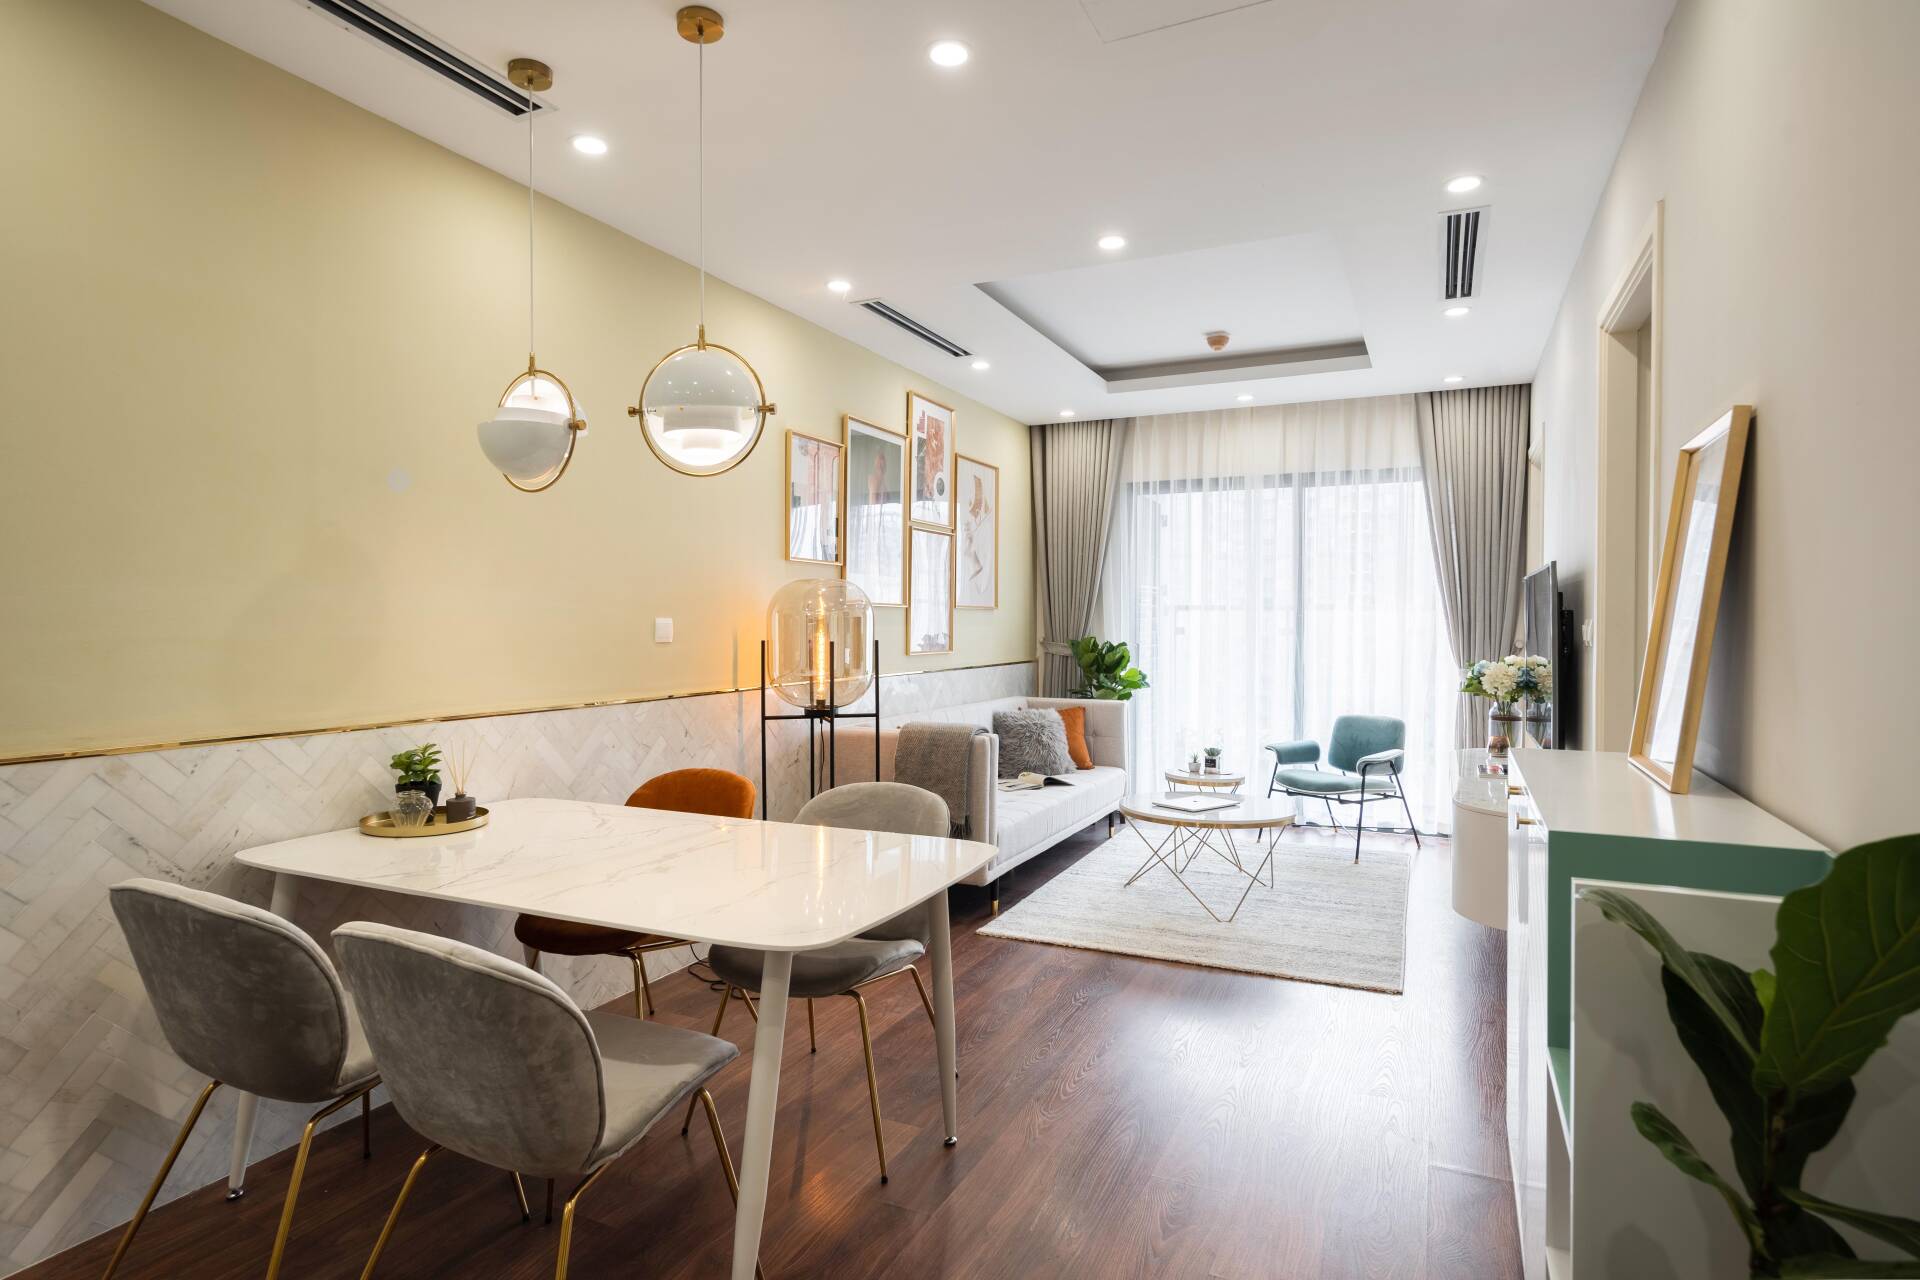 MID House - 66sqm apartment with bright colors.